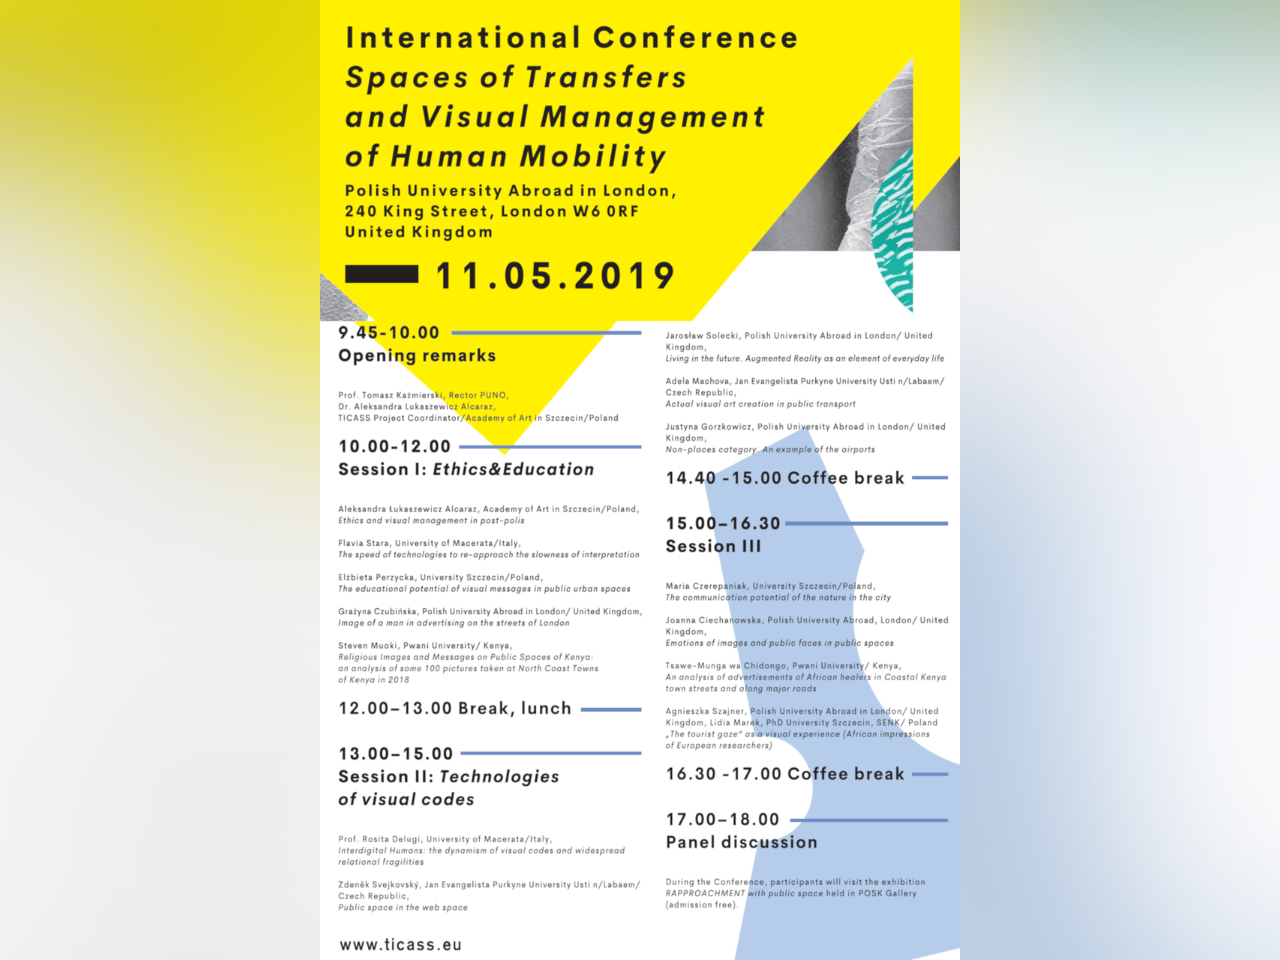 TICASS Conference: “Spaces of Transfers and Visual Management of Human Mobility”